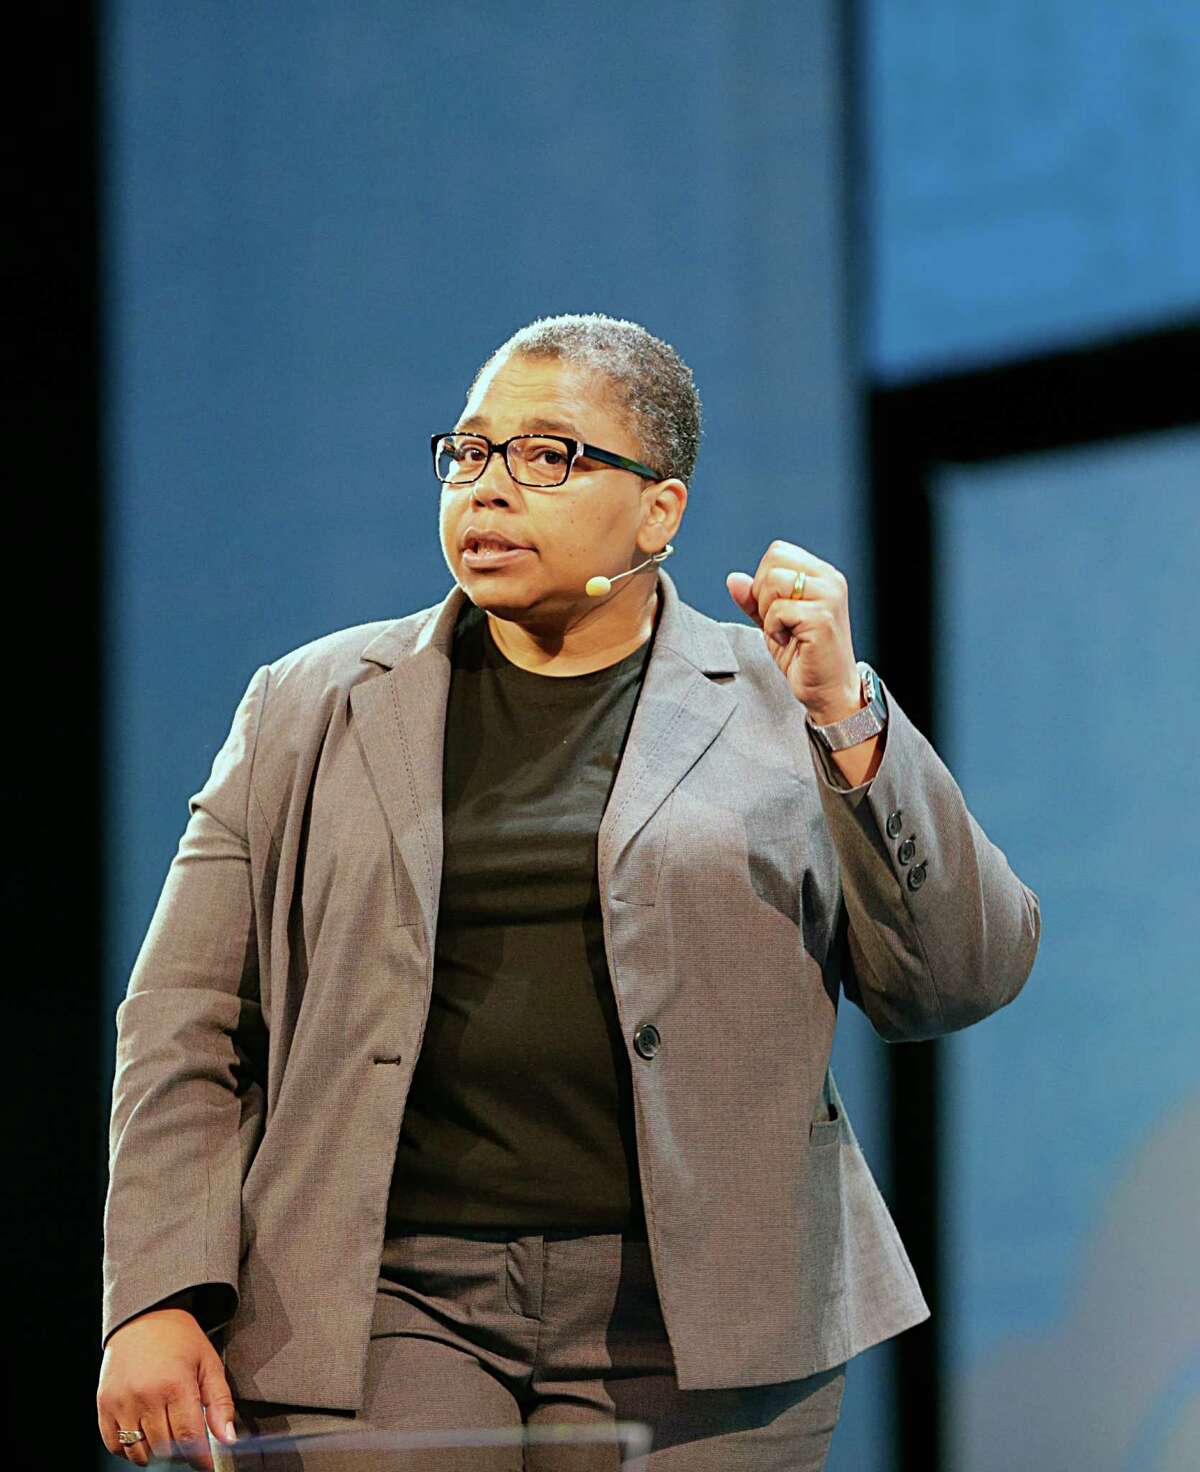 Latanya Sweeney, Professor of Government and Technology in Residence at Harvard University and Director of the Data Privacy Lab in the Institute of Quantitative Social Science at Harvard during her keynote speech at the Grace Hopper Celebration of Women in Computing conference at the Toyota Center Oct. 19, 2016, in Houston. ( James Nielsen / Houston Chronicle )